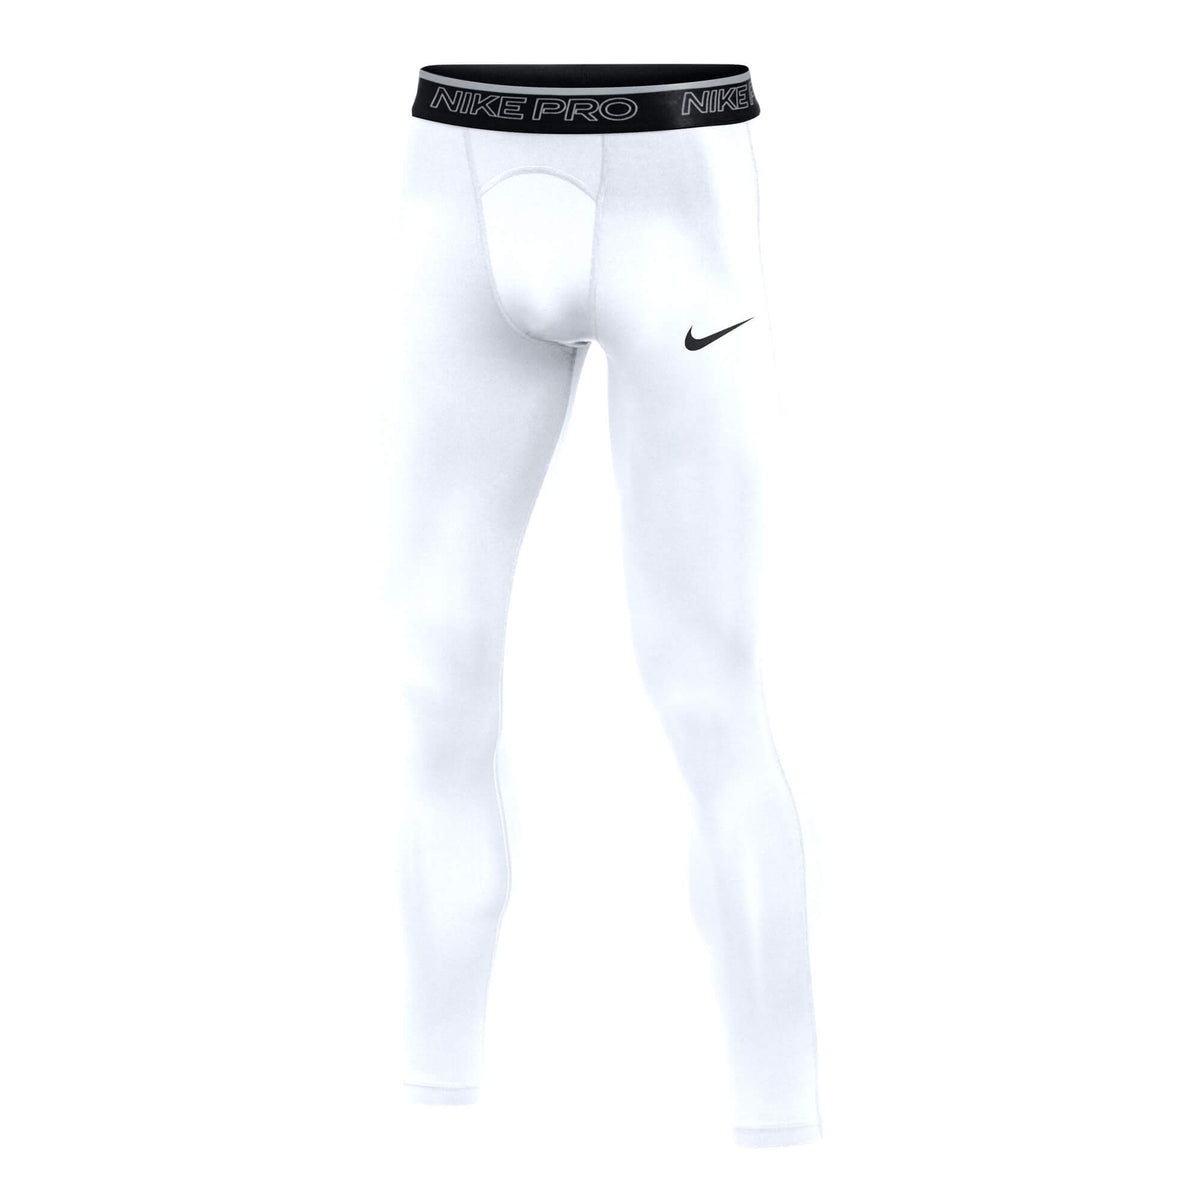 NEW!! Nike Boy's Black w/ White Swoosh Pro Training Tights Variety in Size  #174